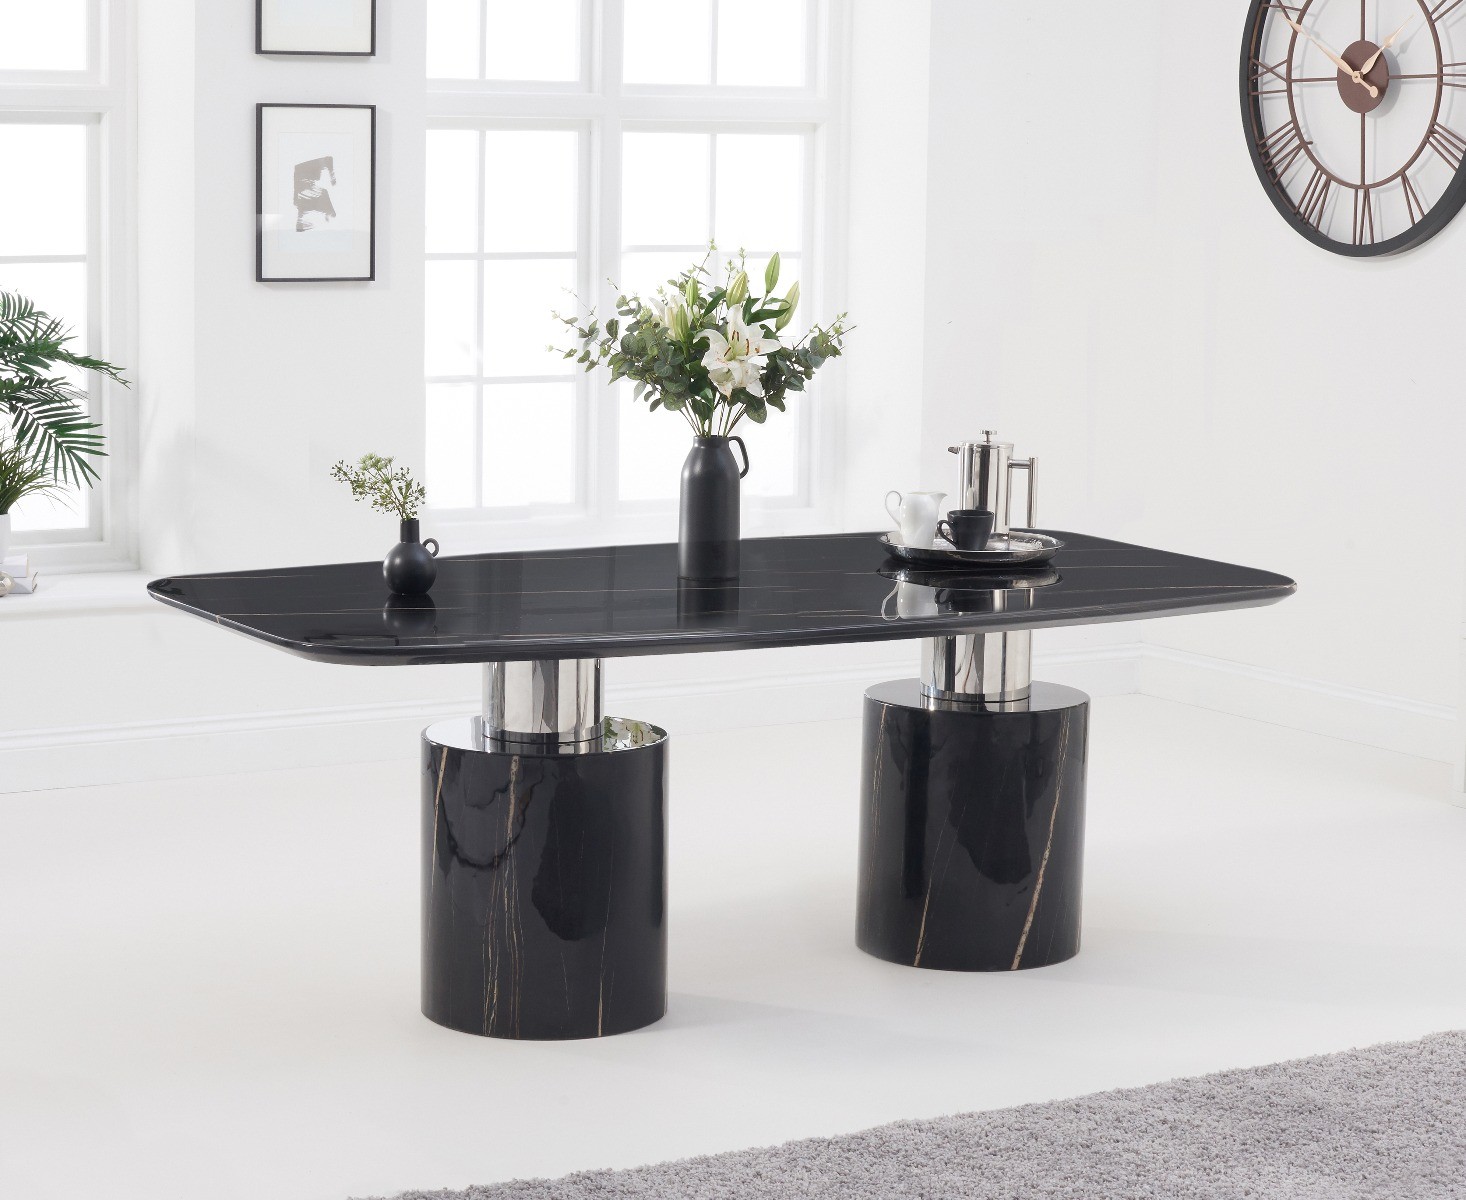 Photo 1 of Antonio 180cm black marble dining table with 8 grey aldo chairs